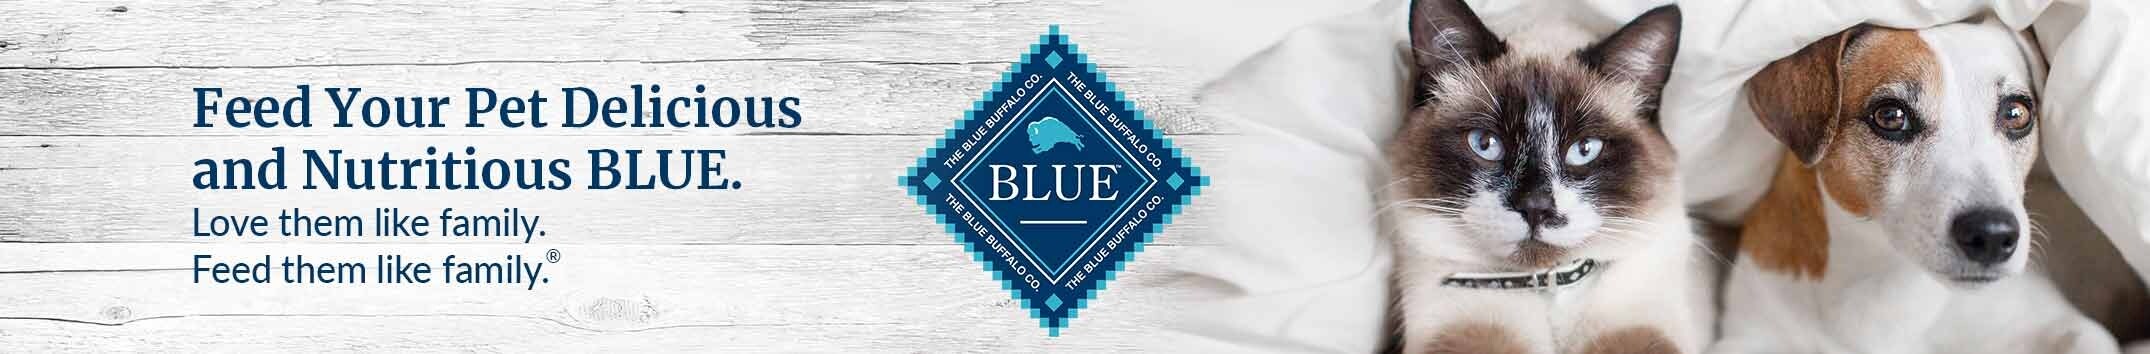 Feed your pet delicious and nutritious BLUE. Love them like family. Feed them like family.